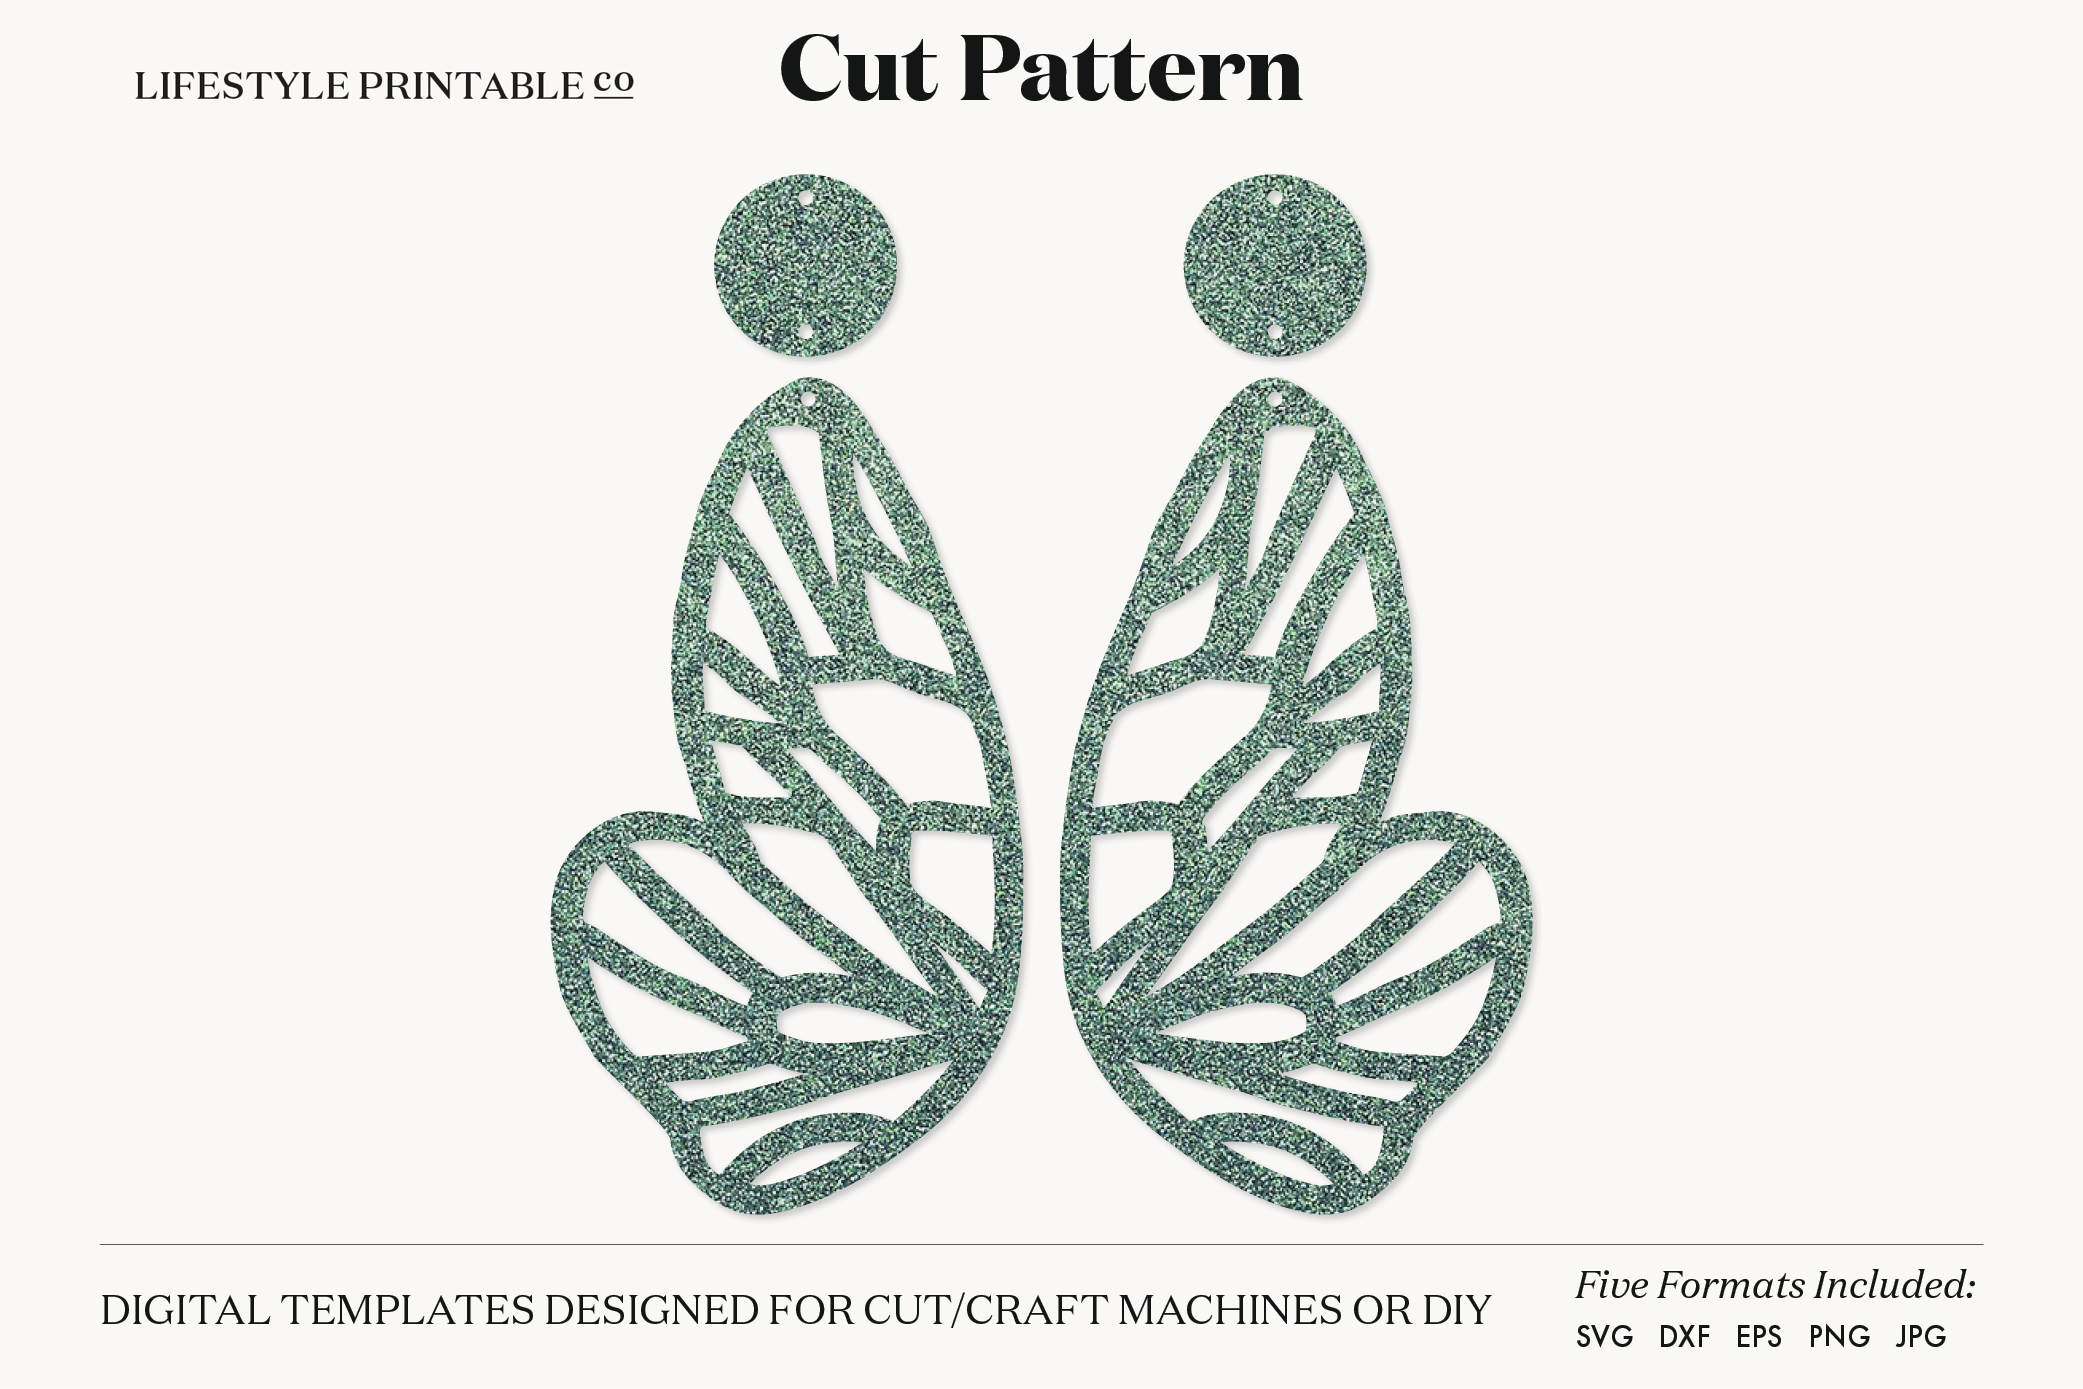 Download Earrings Svg Template Cut File Cricut Earrings Bundle Leather Earring By Lifestyle Printable Co Thehungryjpeg Com SVG, PNG, EPS, DXF File